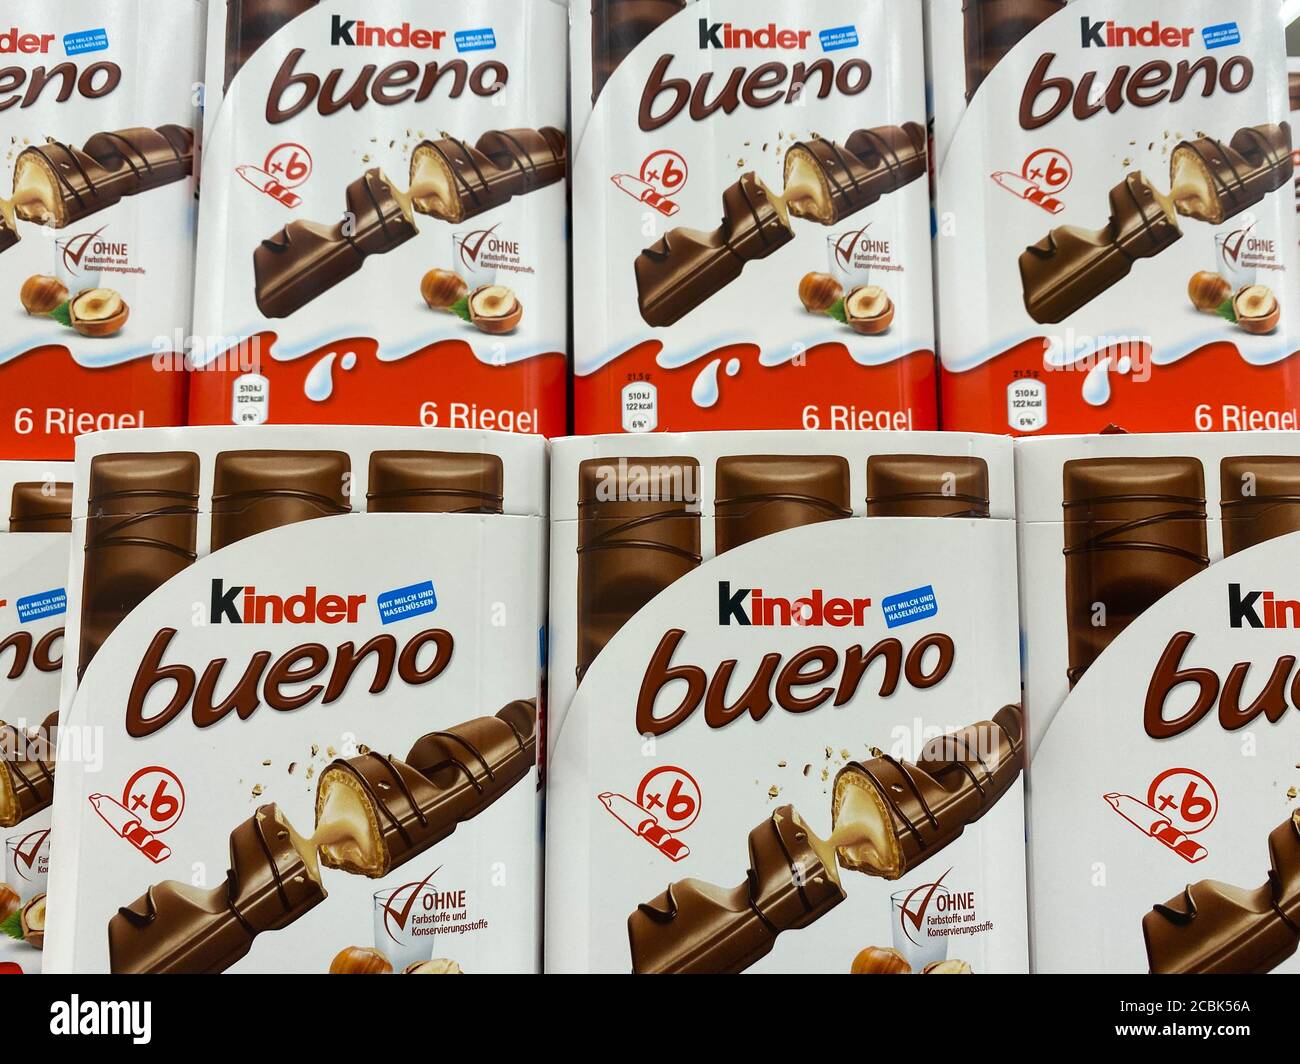 https://c8.alamy.com/comp/2CBK56A/viersen-germany-july-9-2020-view-on-stack-kinder-bueno-chocolate-bar-boxes-in-shelf-of-german-supermarket-focus-on-lower-row-2CBK56A.jpg